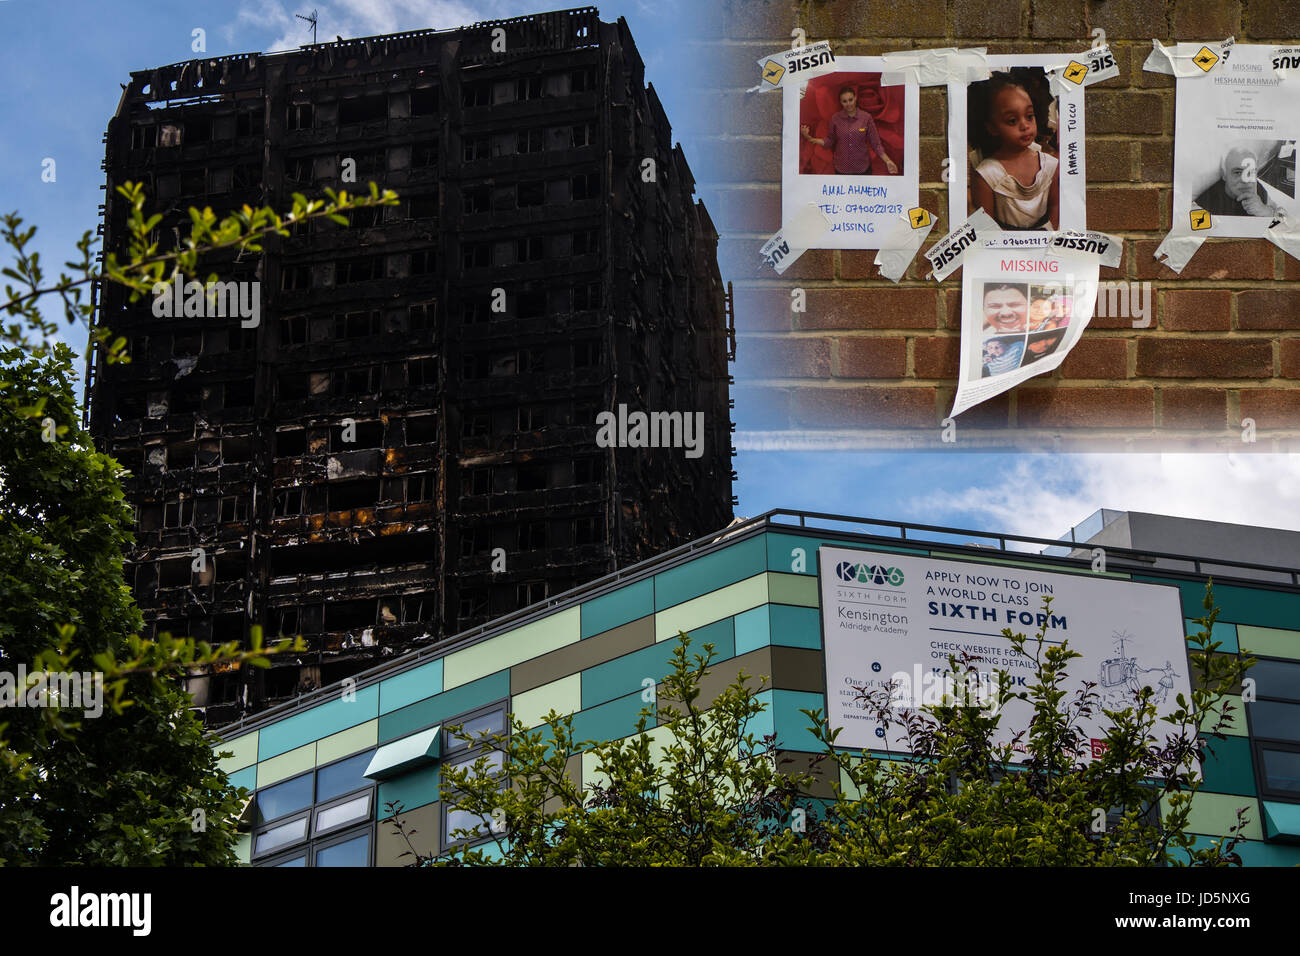 LONDON, UK - JUNE 16 2017 Grenfell tower after fire, with Kensington Aldridge Academy and missing people Stock Photo